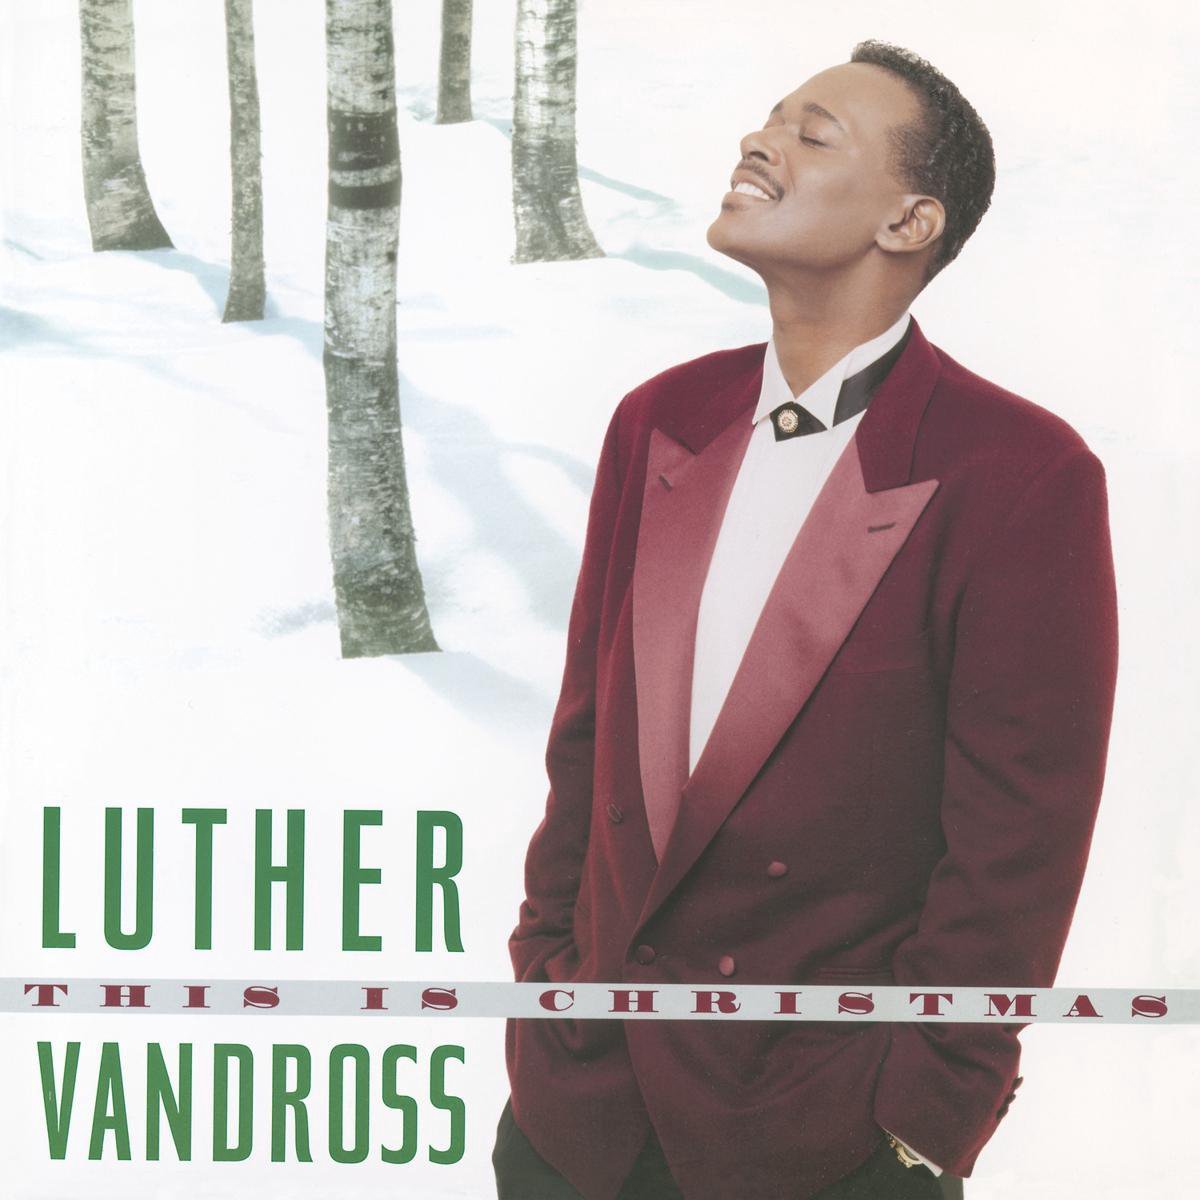 luther vandross songs album cover